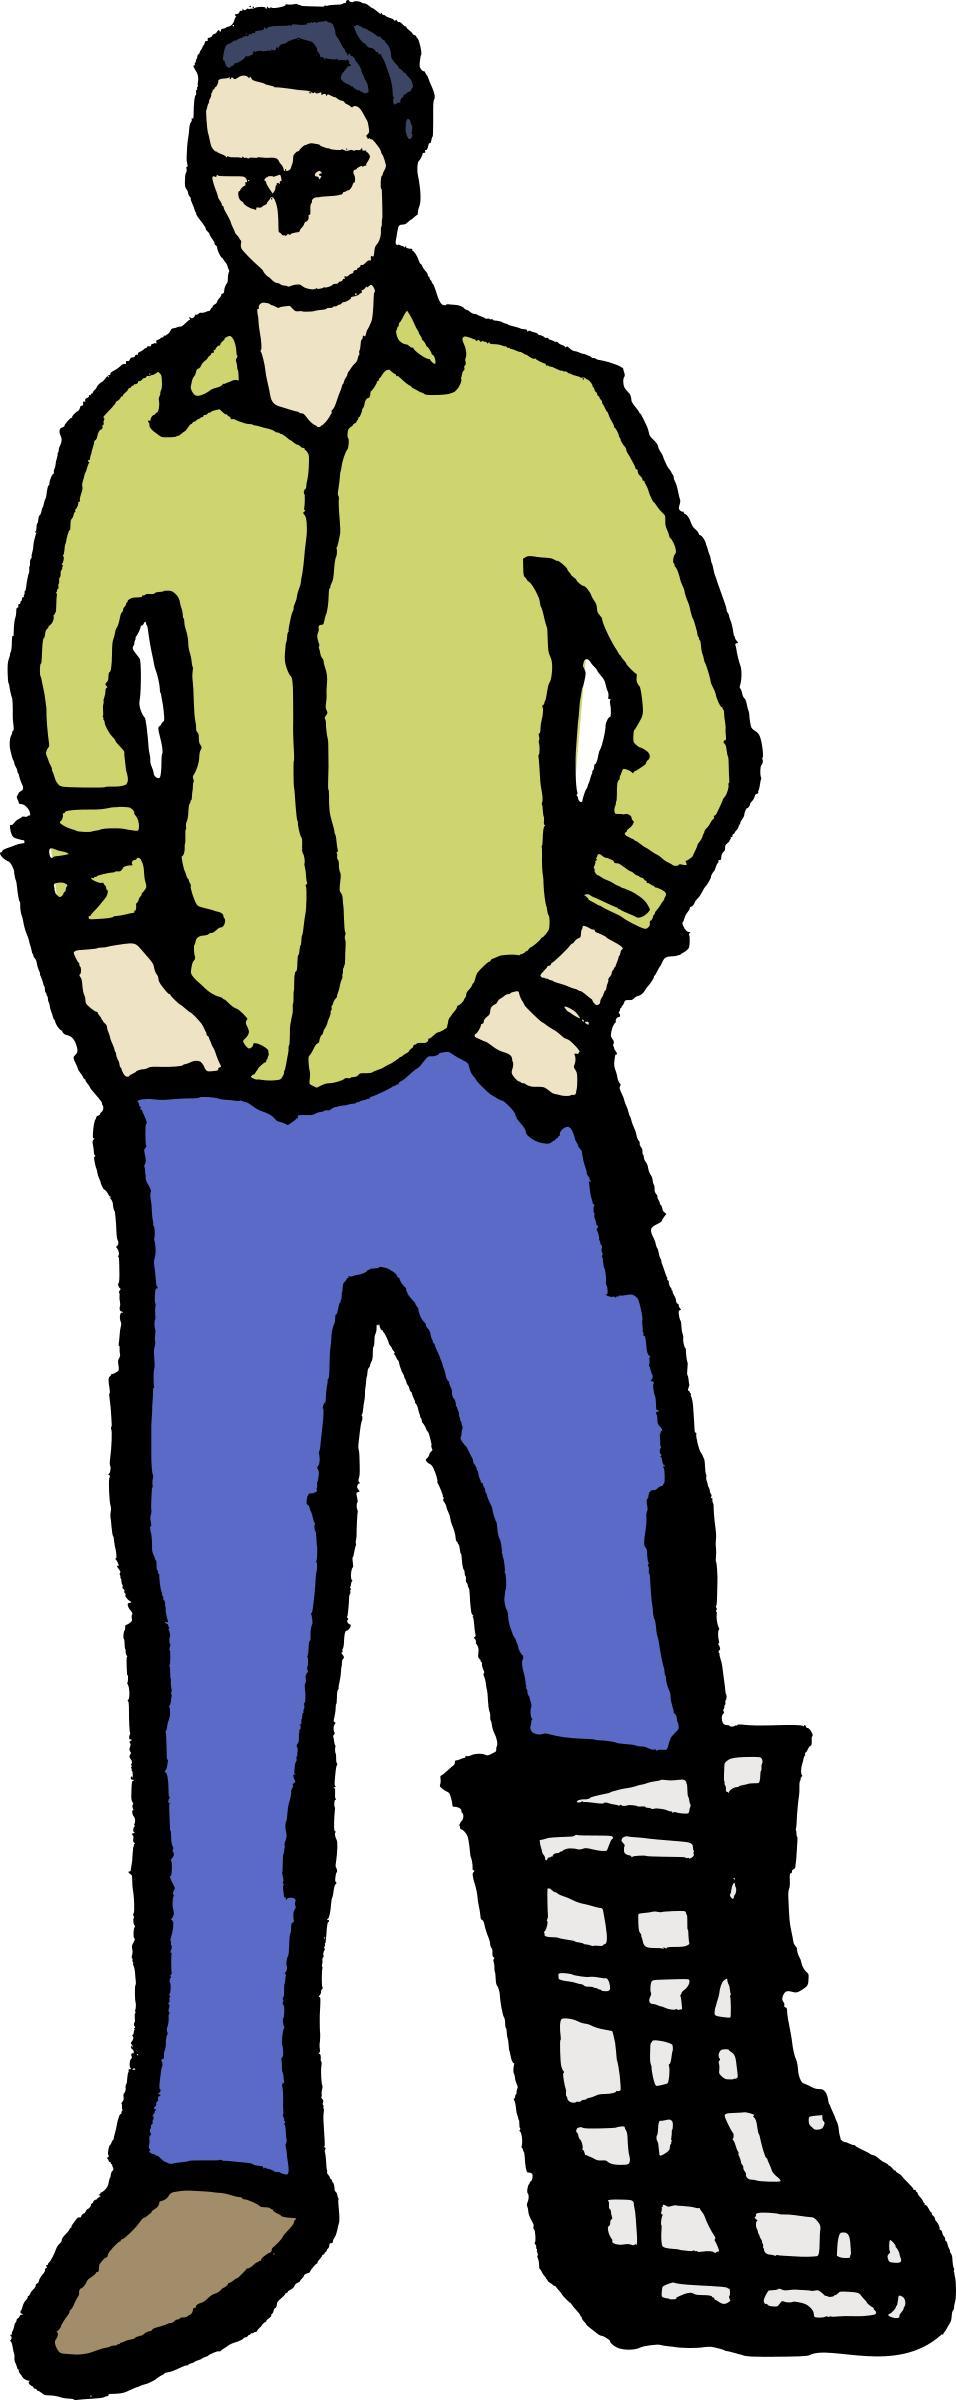 Cool Man in a Cast png transparent